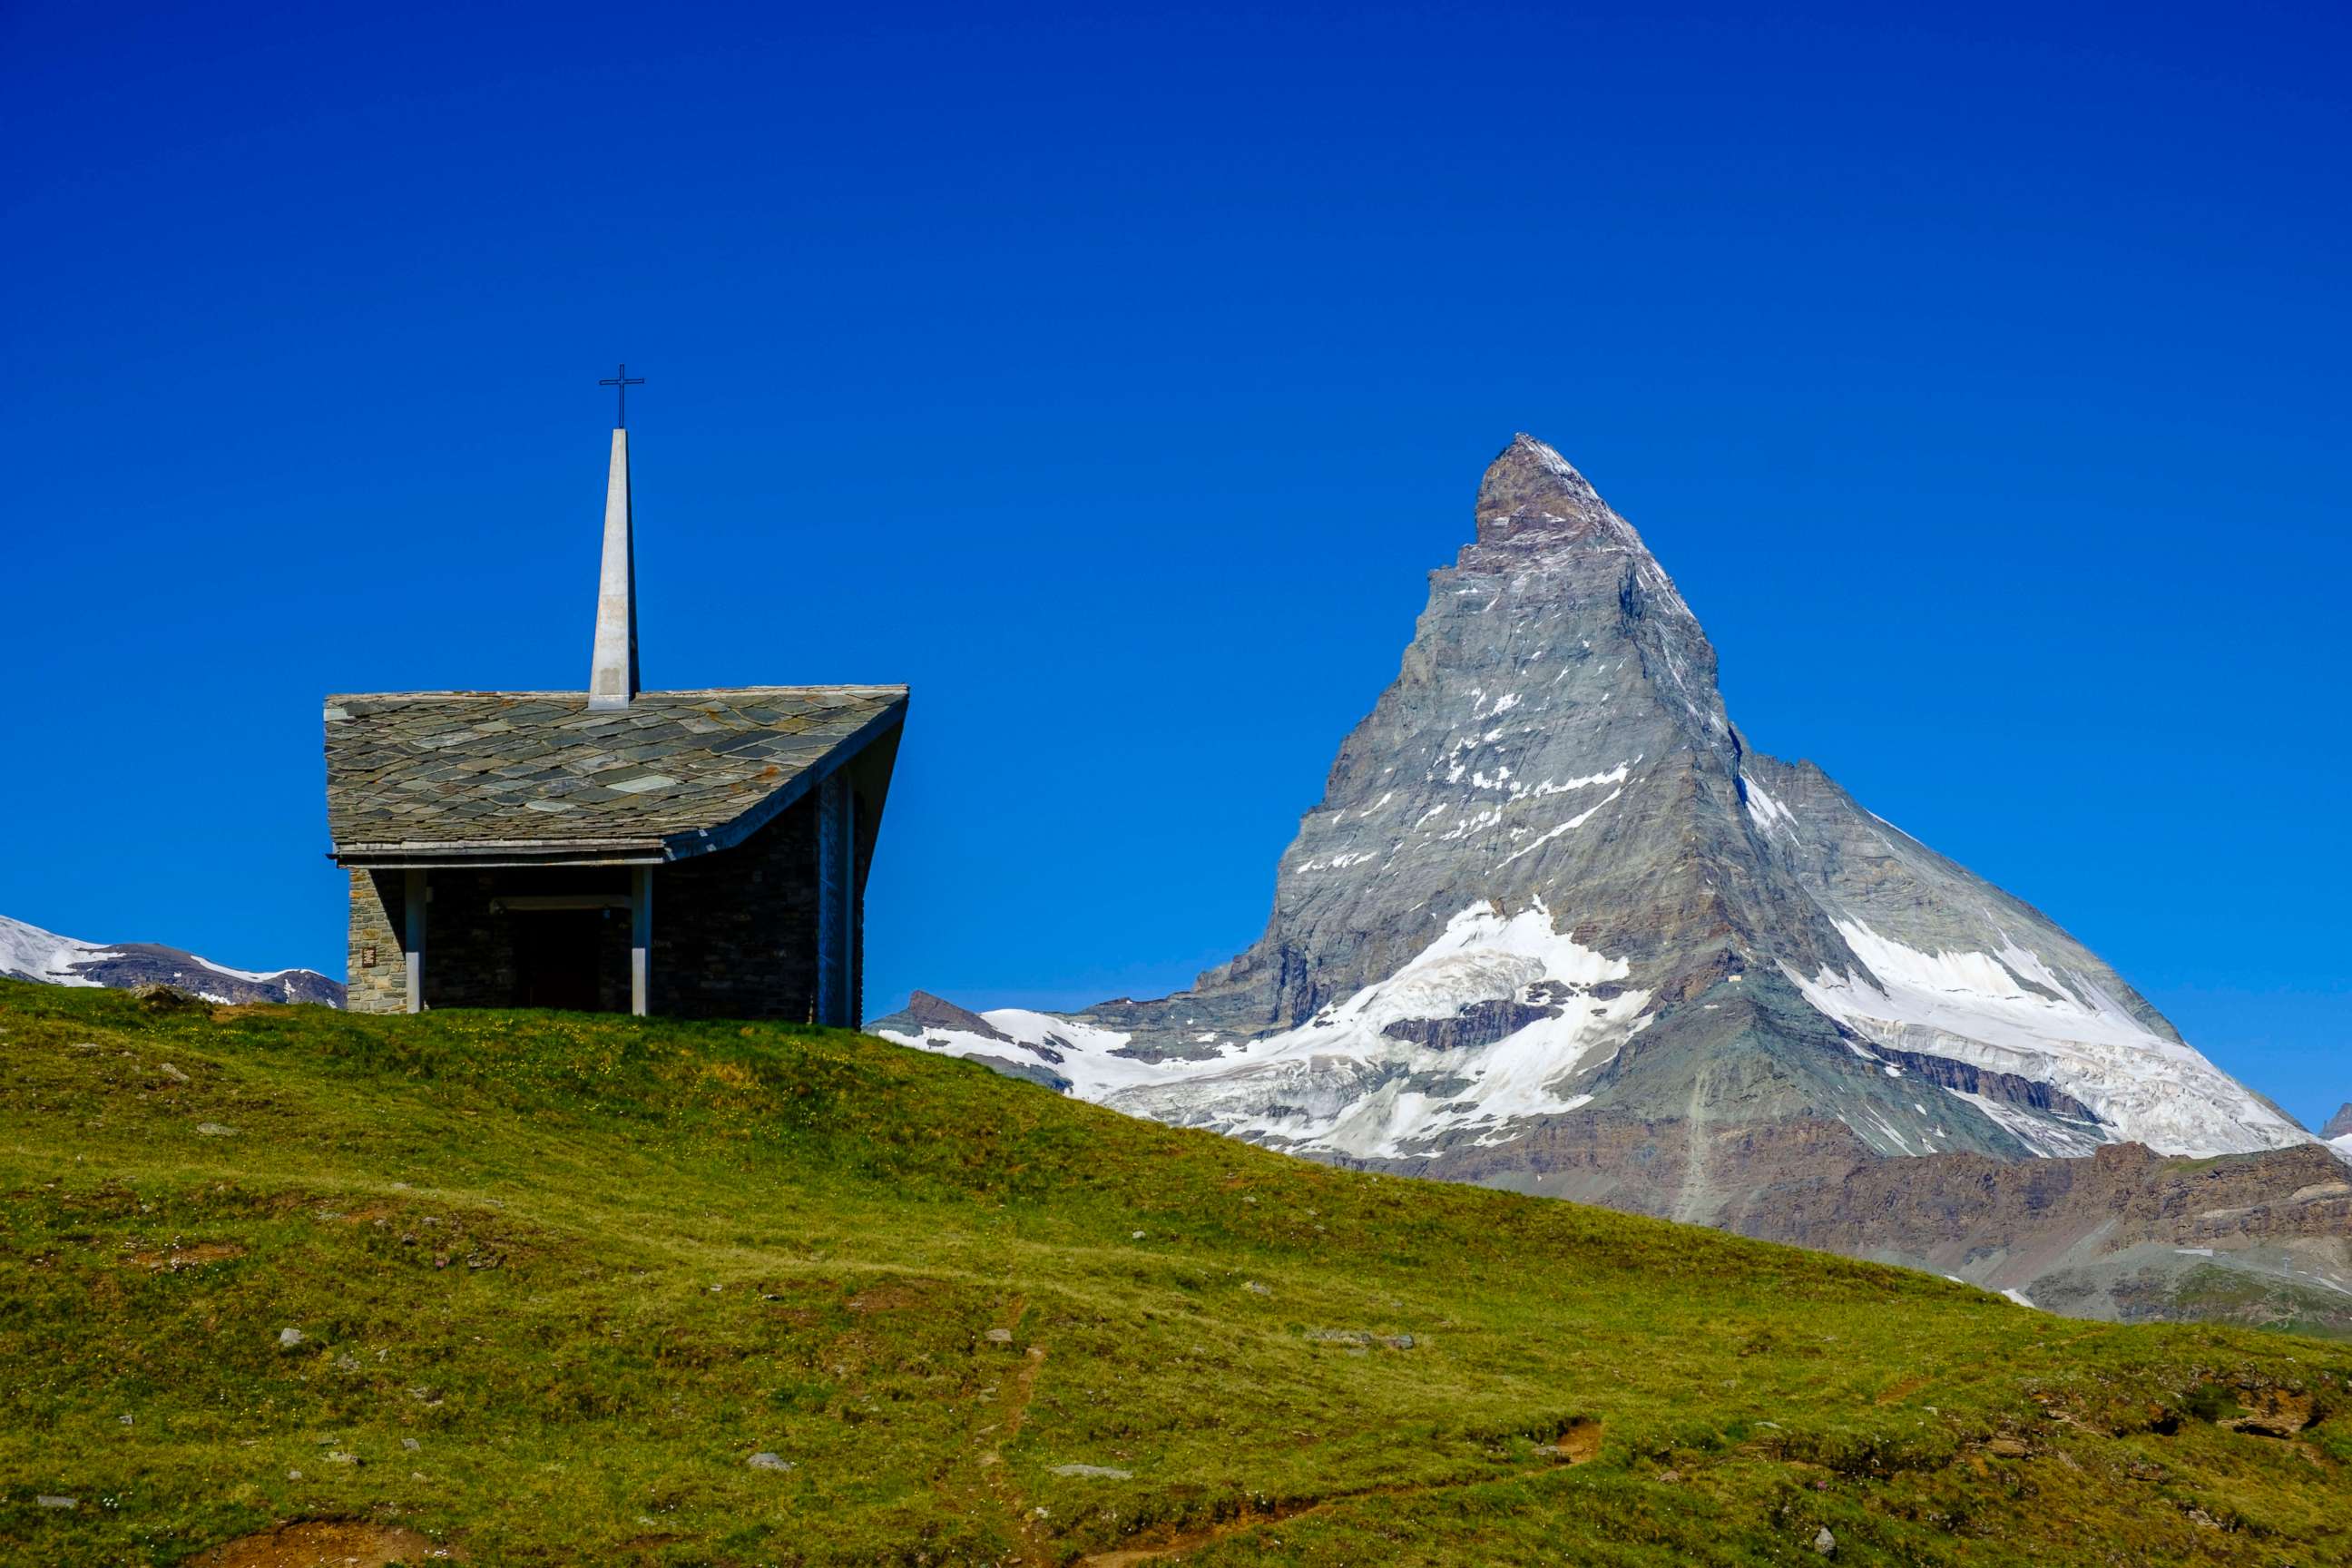 PHOTO: The East and North Face of the Matterhorn, Monte Cervino, behind the small Chapel Bruder Klaus, in this file photo dated June 6, 2017, in Zermatt, Valais, Switzerland.